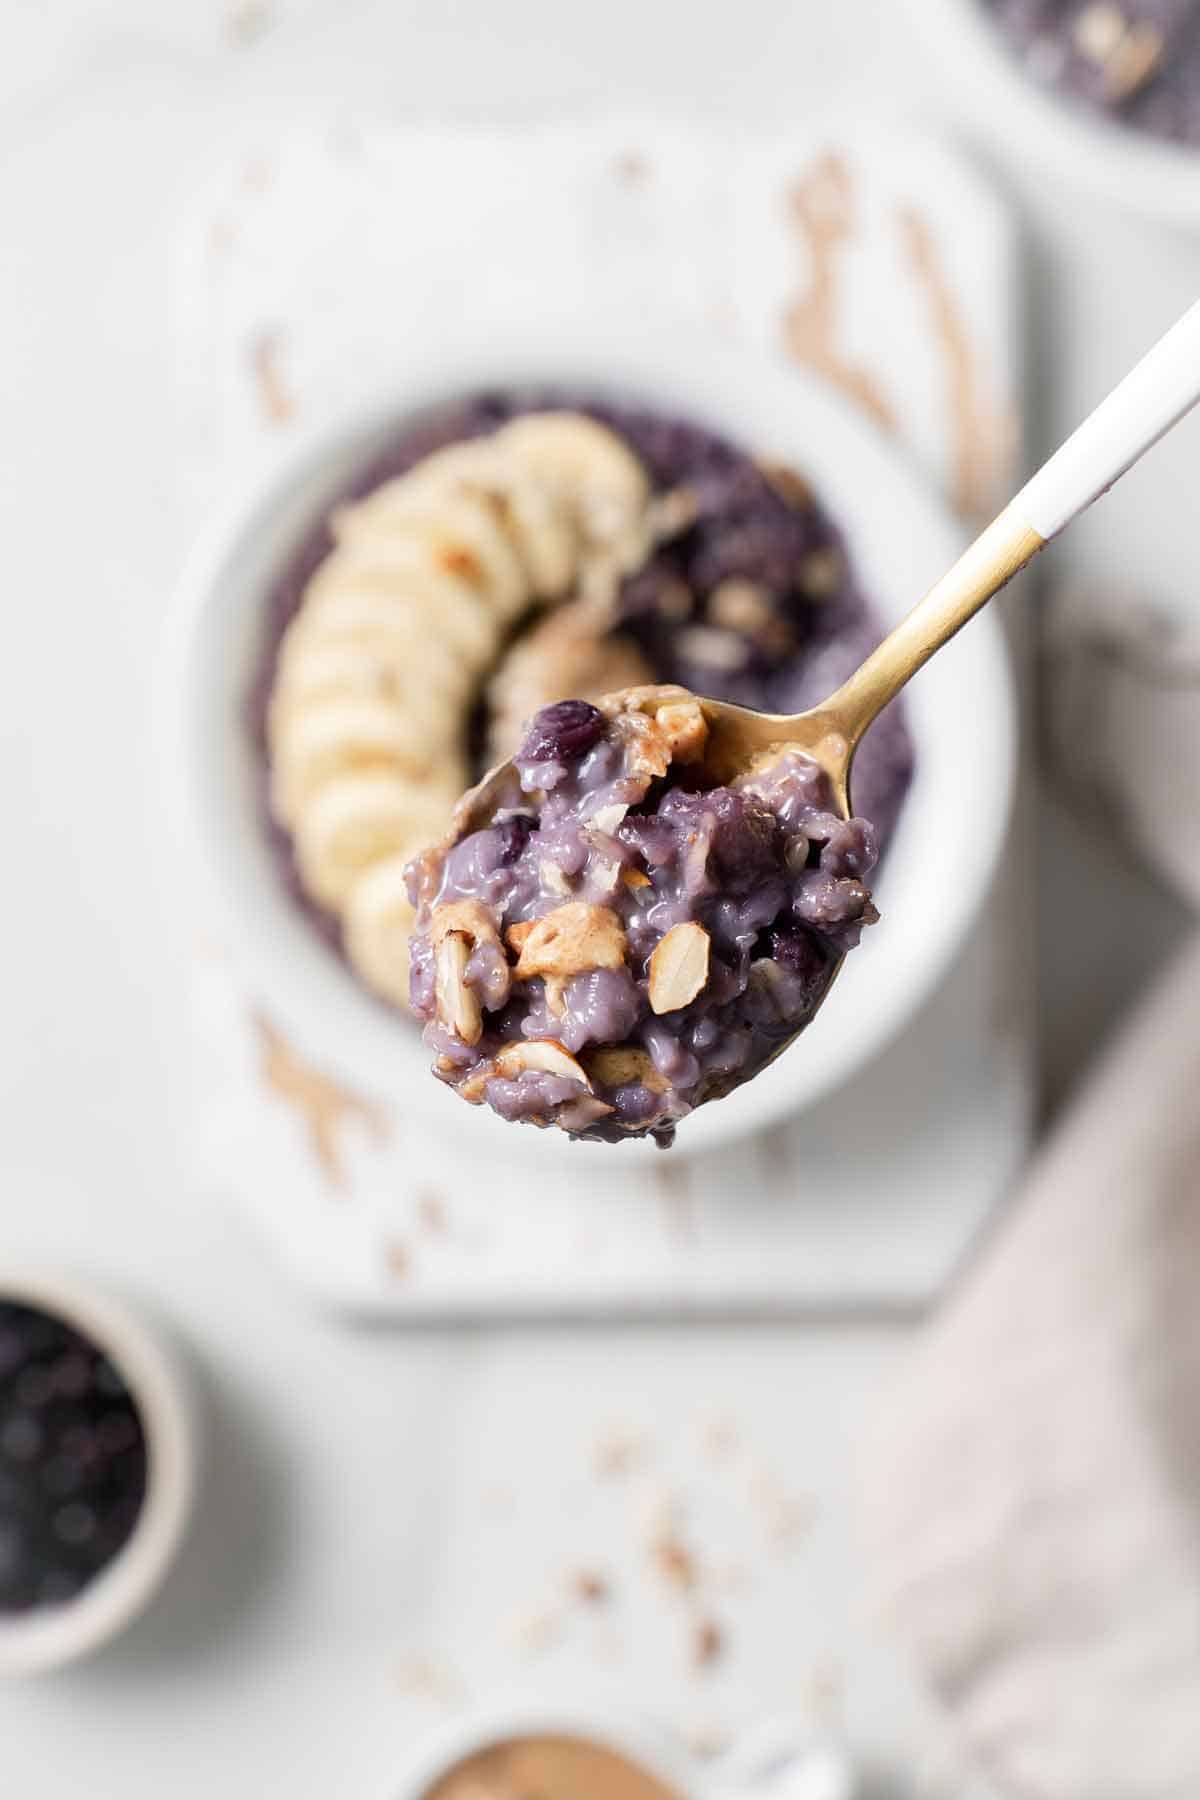 A spoonful of blueberry oats.